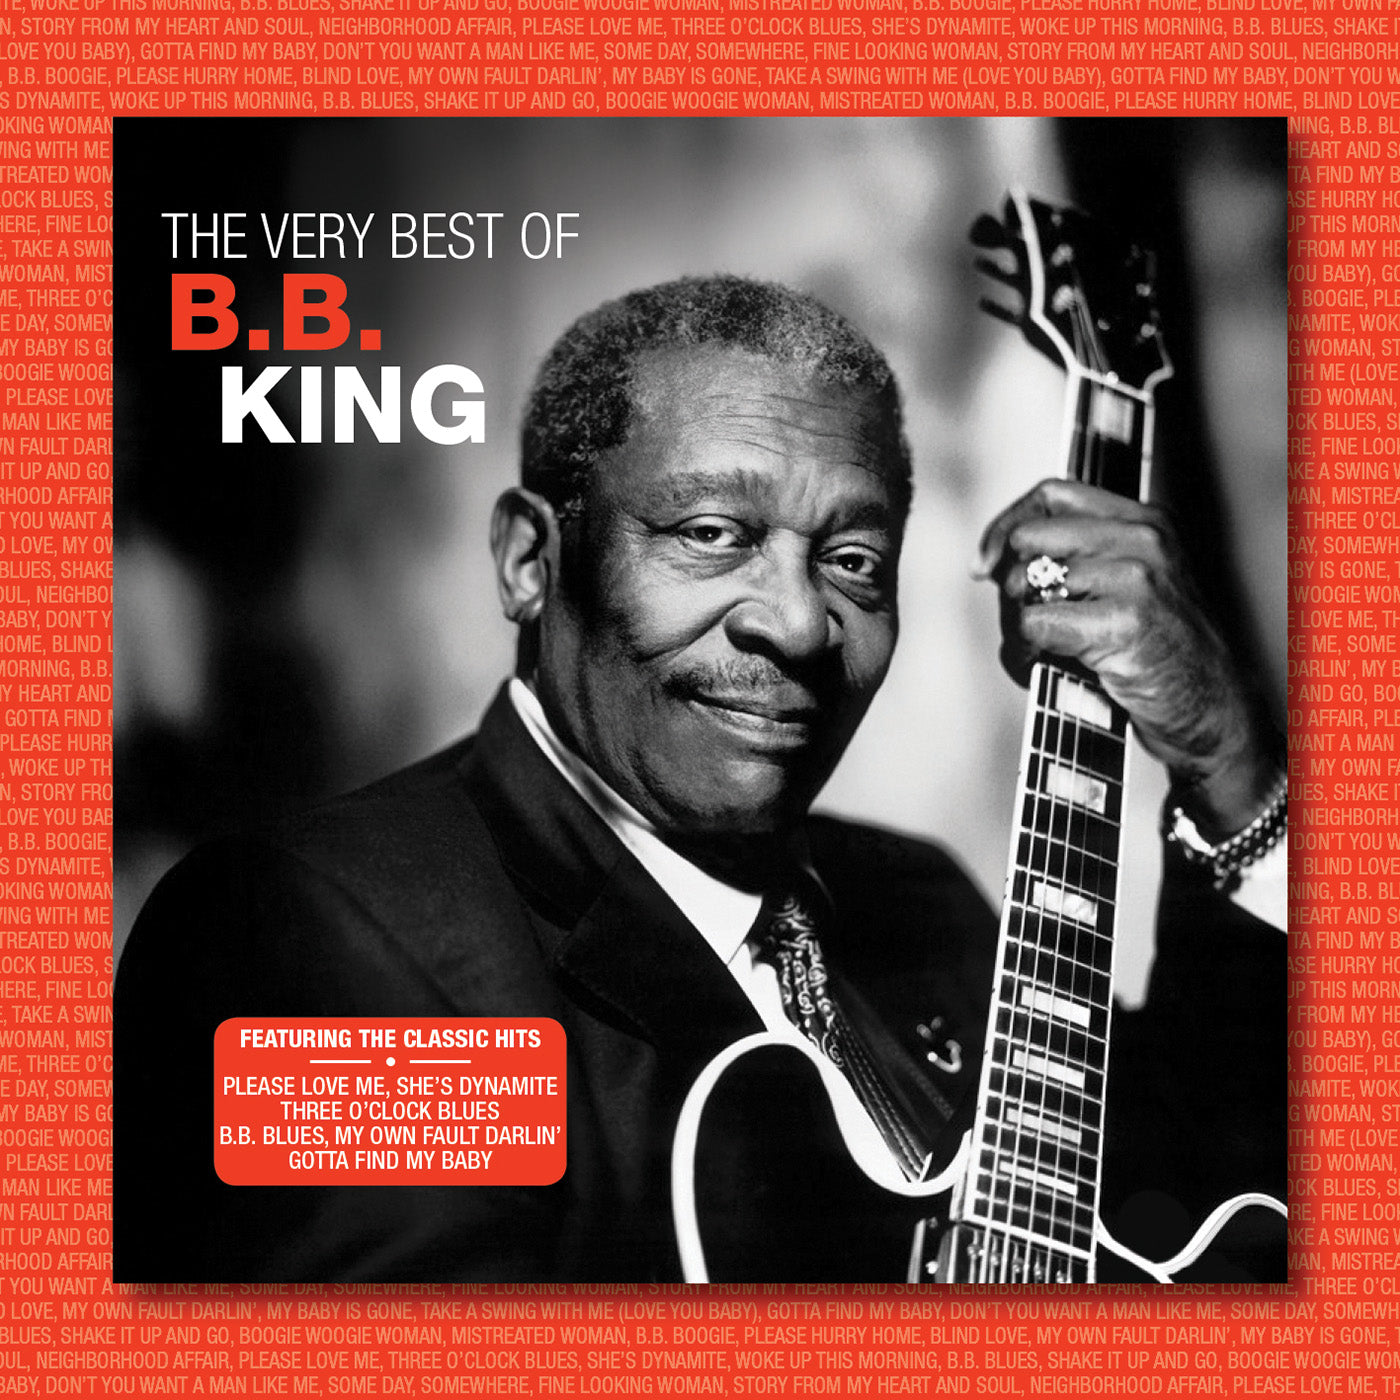 B.B. KING - THE VERY BEST OF